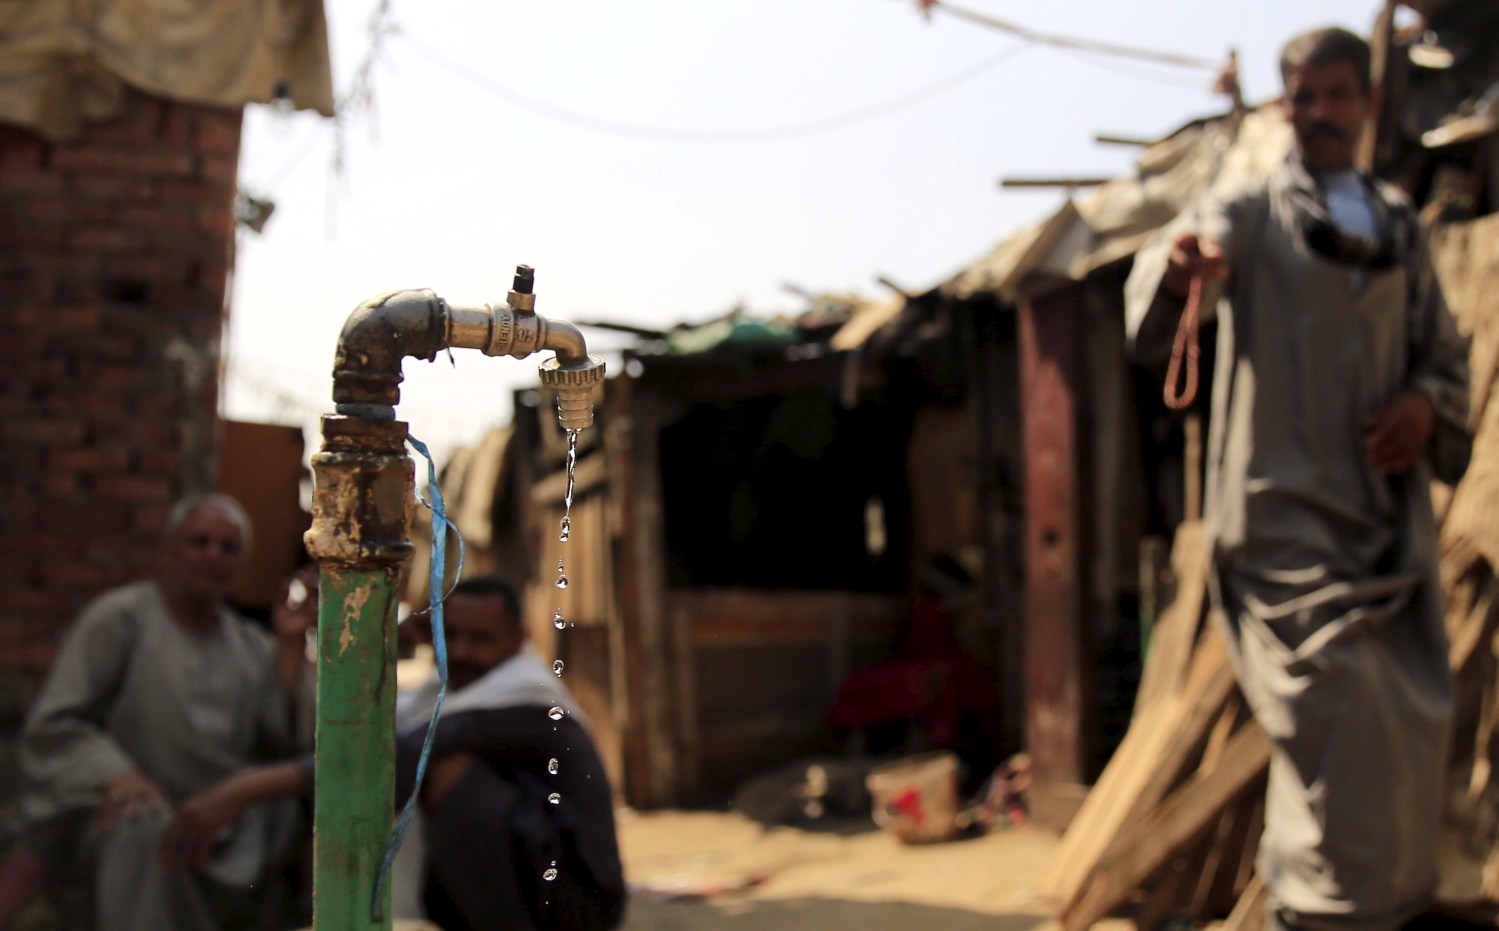 Water drips from a tap as people sit in the Eshash el-Sudan slum in the Dokki neighbourhood of Giza, south of Cairo, Egypt September 2, 2015. Residents of the slum clashed with police in late August, when about 50 ramshackle huts were destroyed and at least 20 people were injured by teargas, local media reported, as authorities attempt to clear the area and rehouse residents. The slum dwellers, some of whom have called Eshash el-Sudan home for 50 years, say there are not enough apartments built nearby to house them. The residents of the slum eke out a living by disposing of rubbish or baking bread. Schooling is too expensive for most of their children, who play with salvaged rubbish amid shacks made out of discarded wood and leather. REUTERS/Amr Abdallah DalshSEARCH "ESHASH EL-SUDAN" FOR ALL PICTURES  - GF10000200359